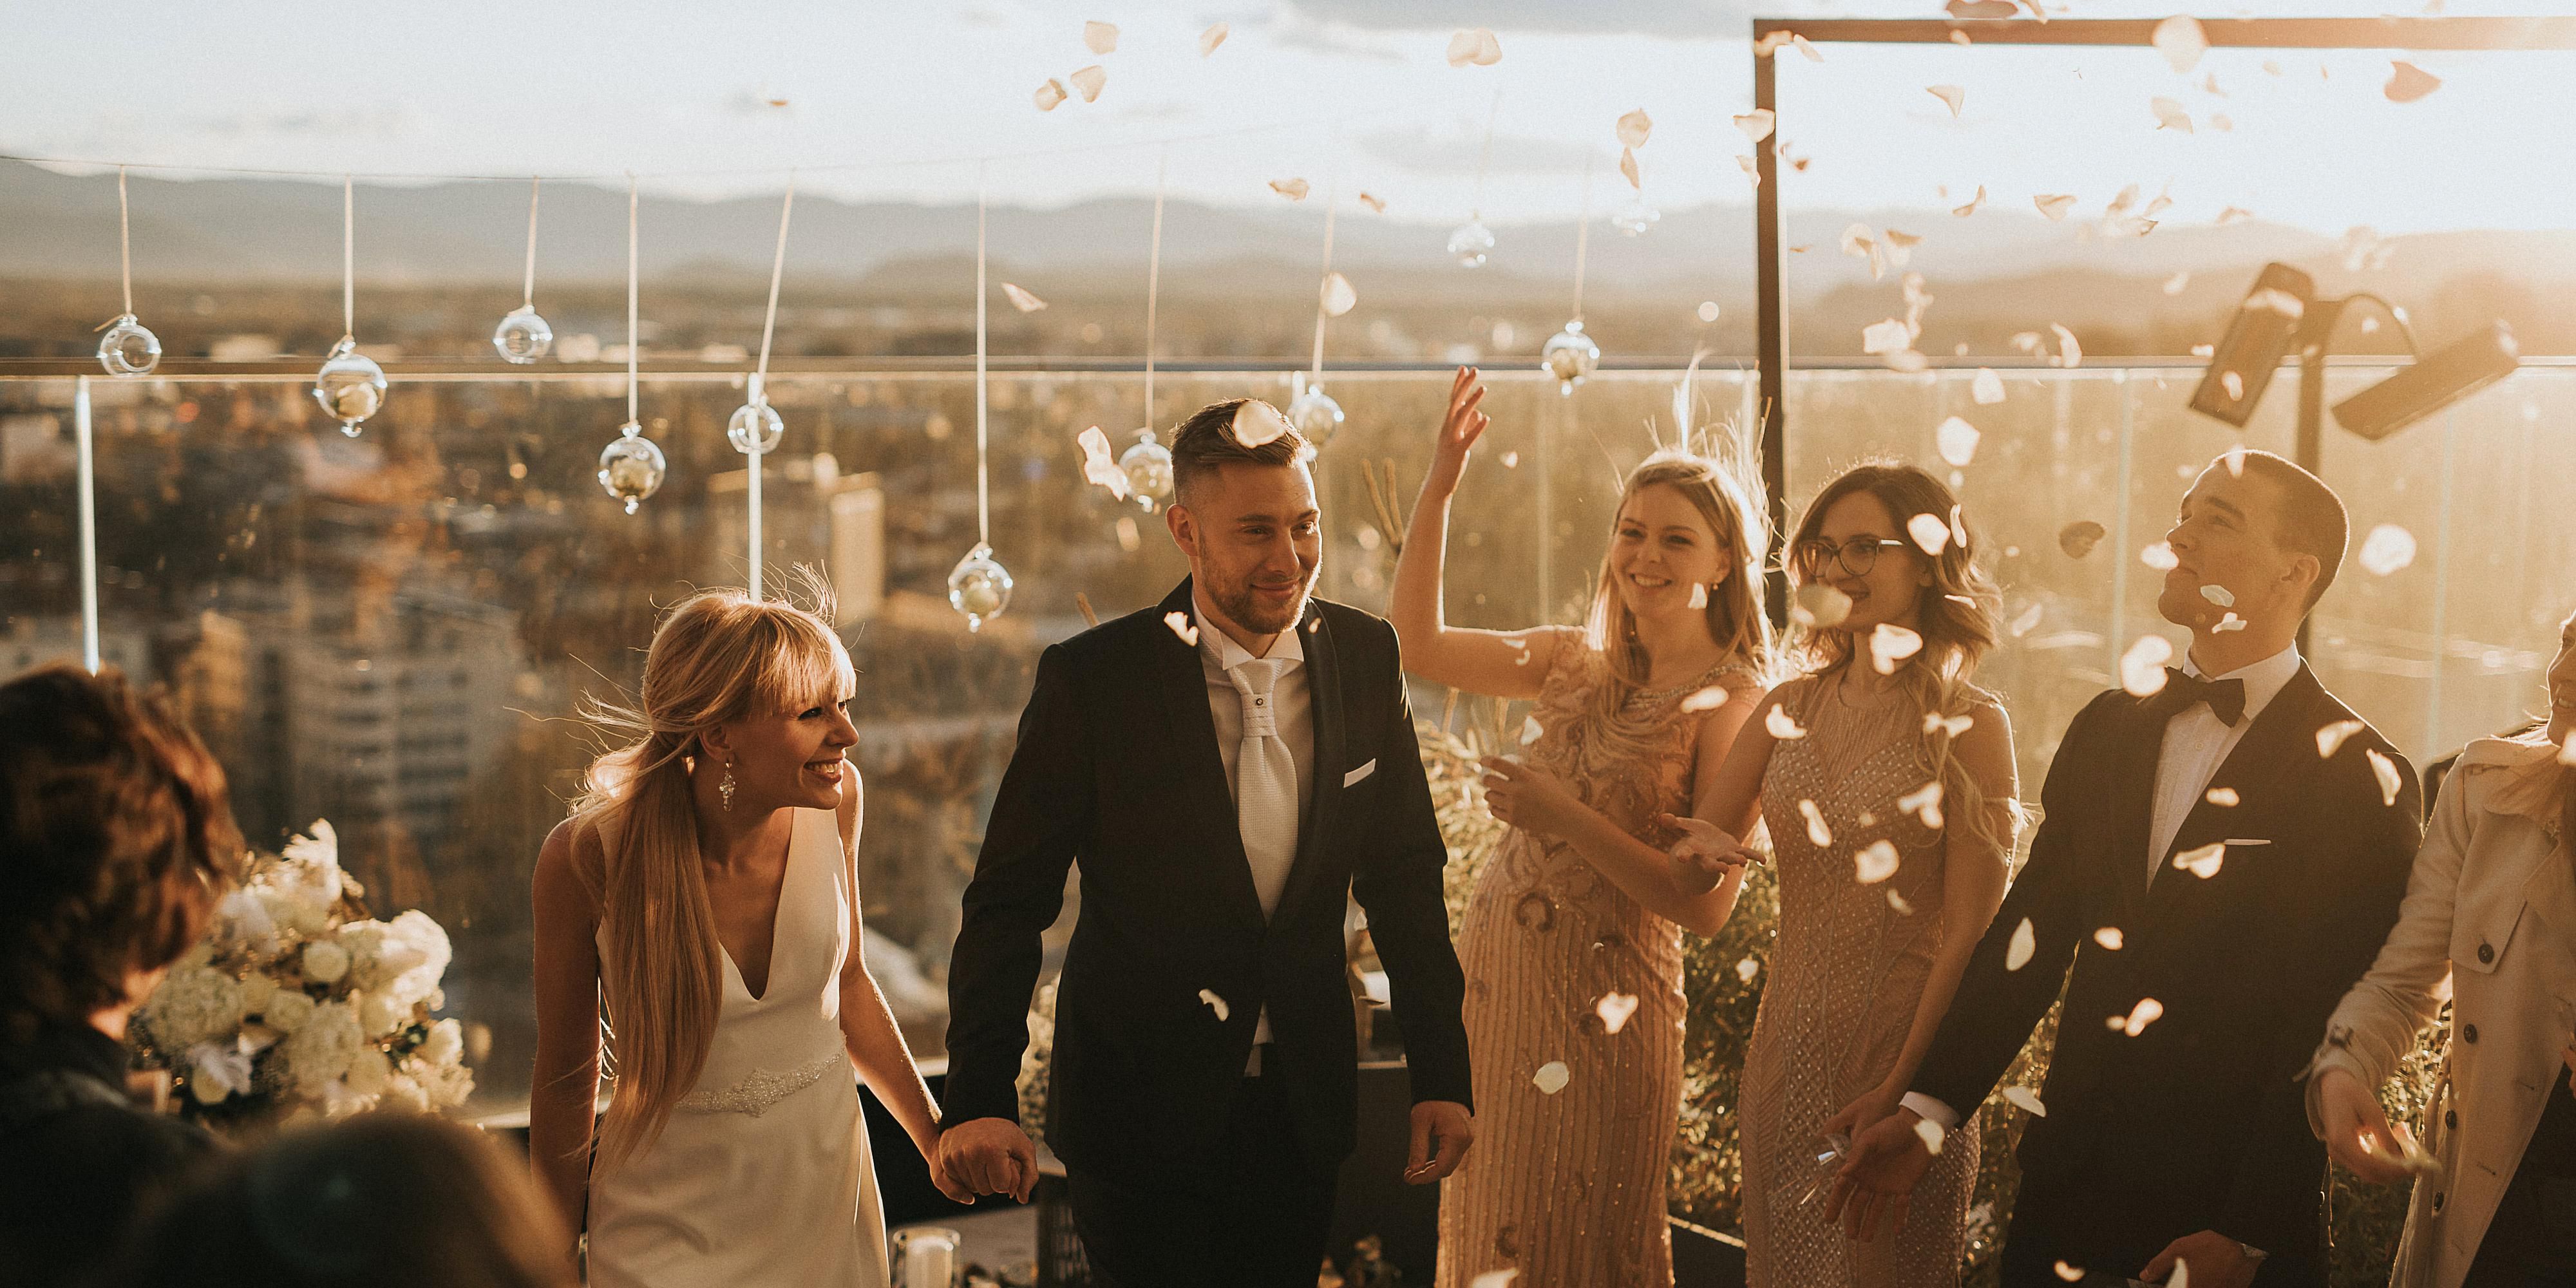 One of the most memorable days of your life deserves the best. At InterContinental Ljubljana, we are fully devoted to working together with you to make your wedding day special and unforgettable. Imagine getting married on top of the city with the beautiful Ljubljana Castle in sight--we call it the urban wedding fairy tale.